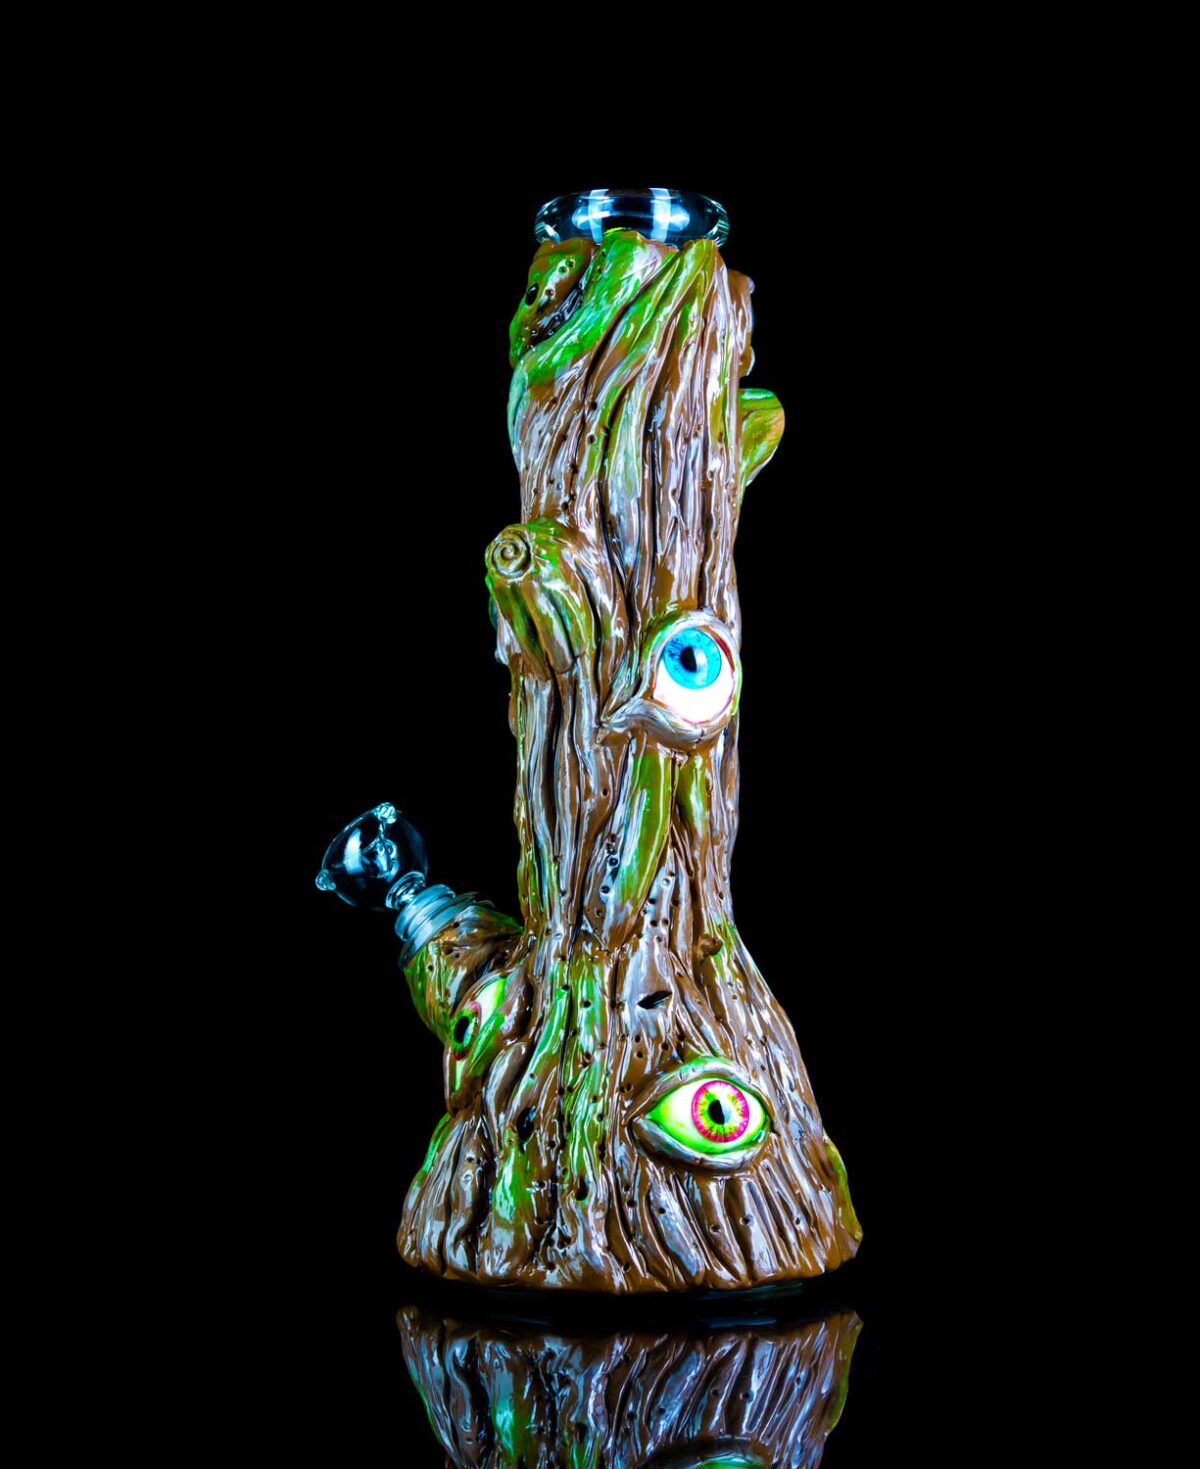 7mm bong with eyes